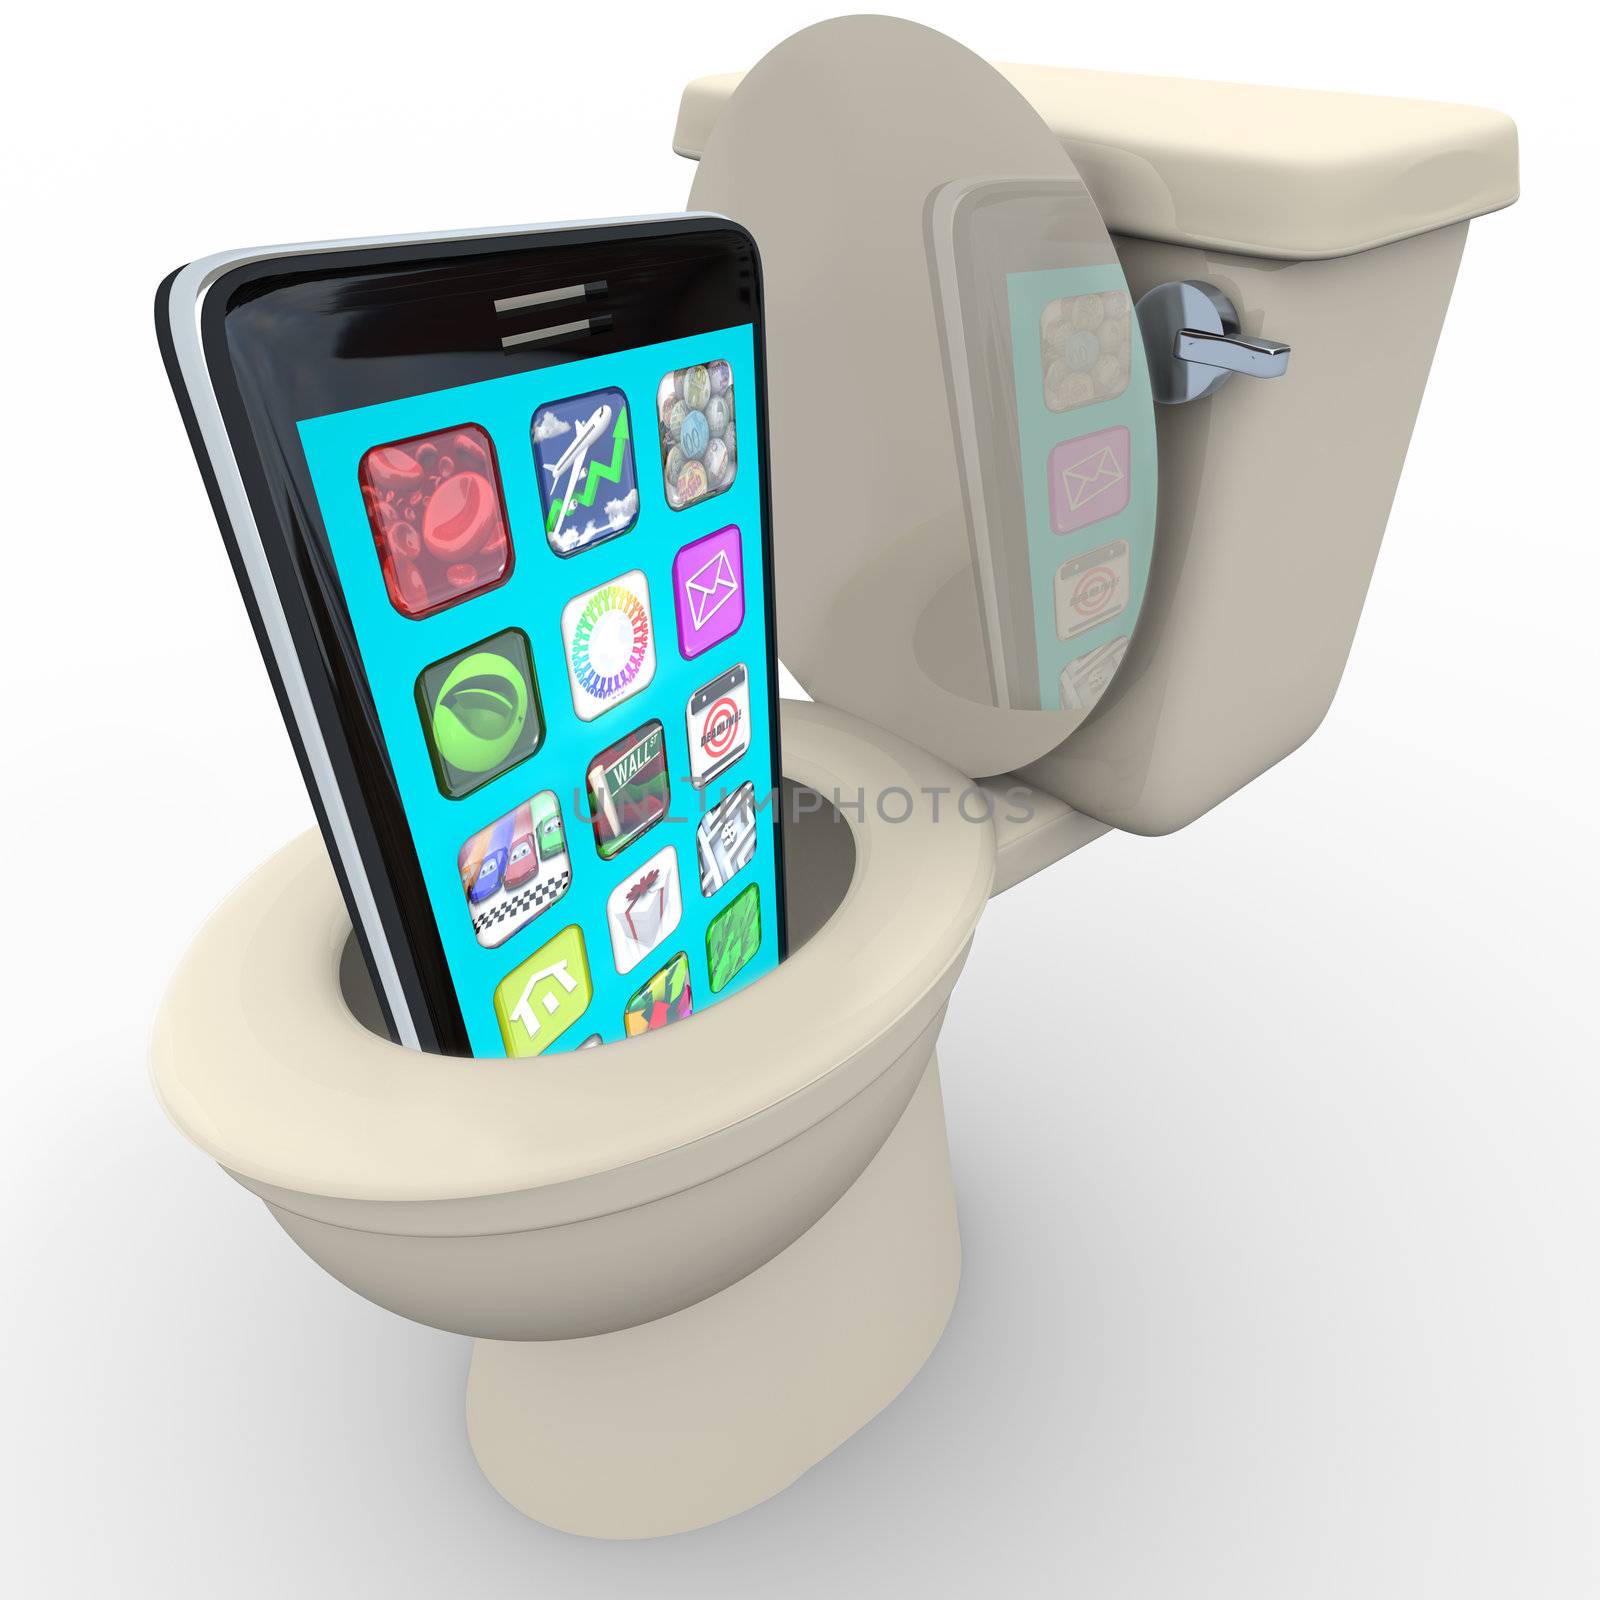 A smart phone with apps being flushed down a toilet symbolizing frustration with poor service, outdated and obsolete old model, in anticipation of replacement with new model cellphone